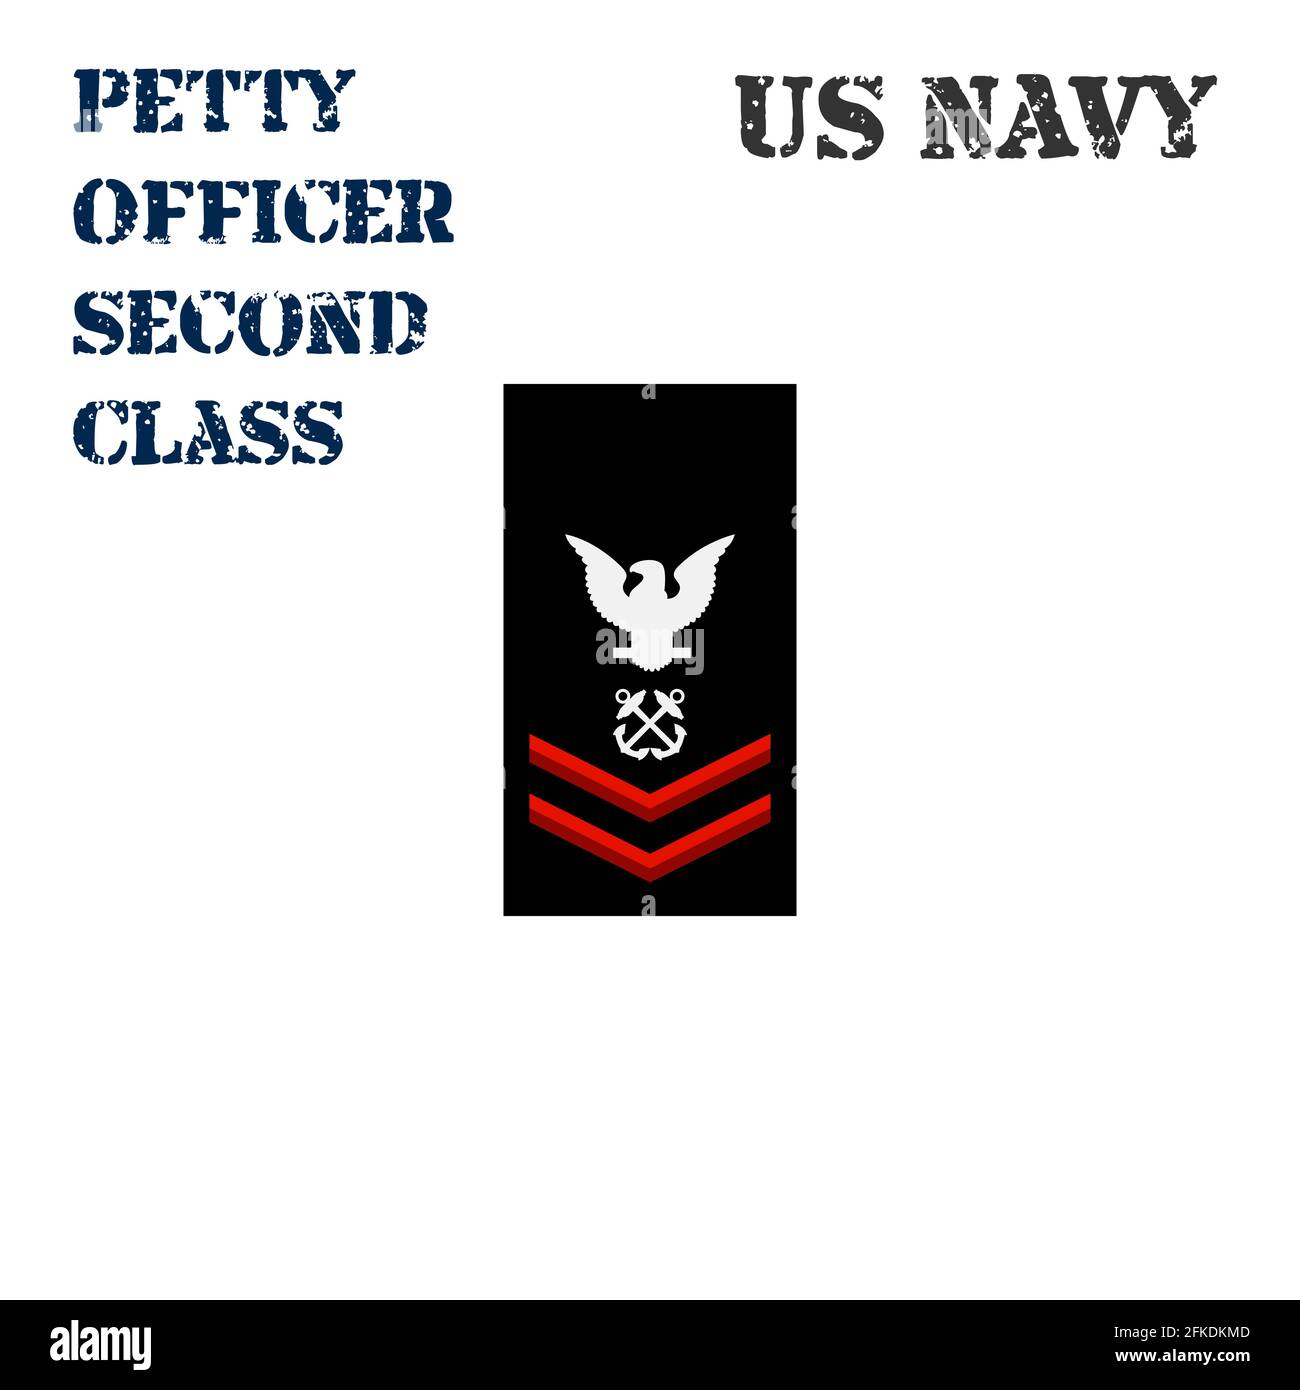 Realistic vector icon of the armband chevron of the Petty Officer Second Class of the US Navy. Stock Vector